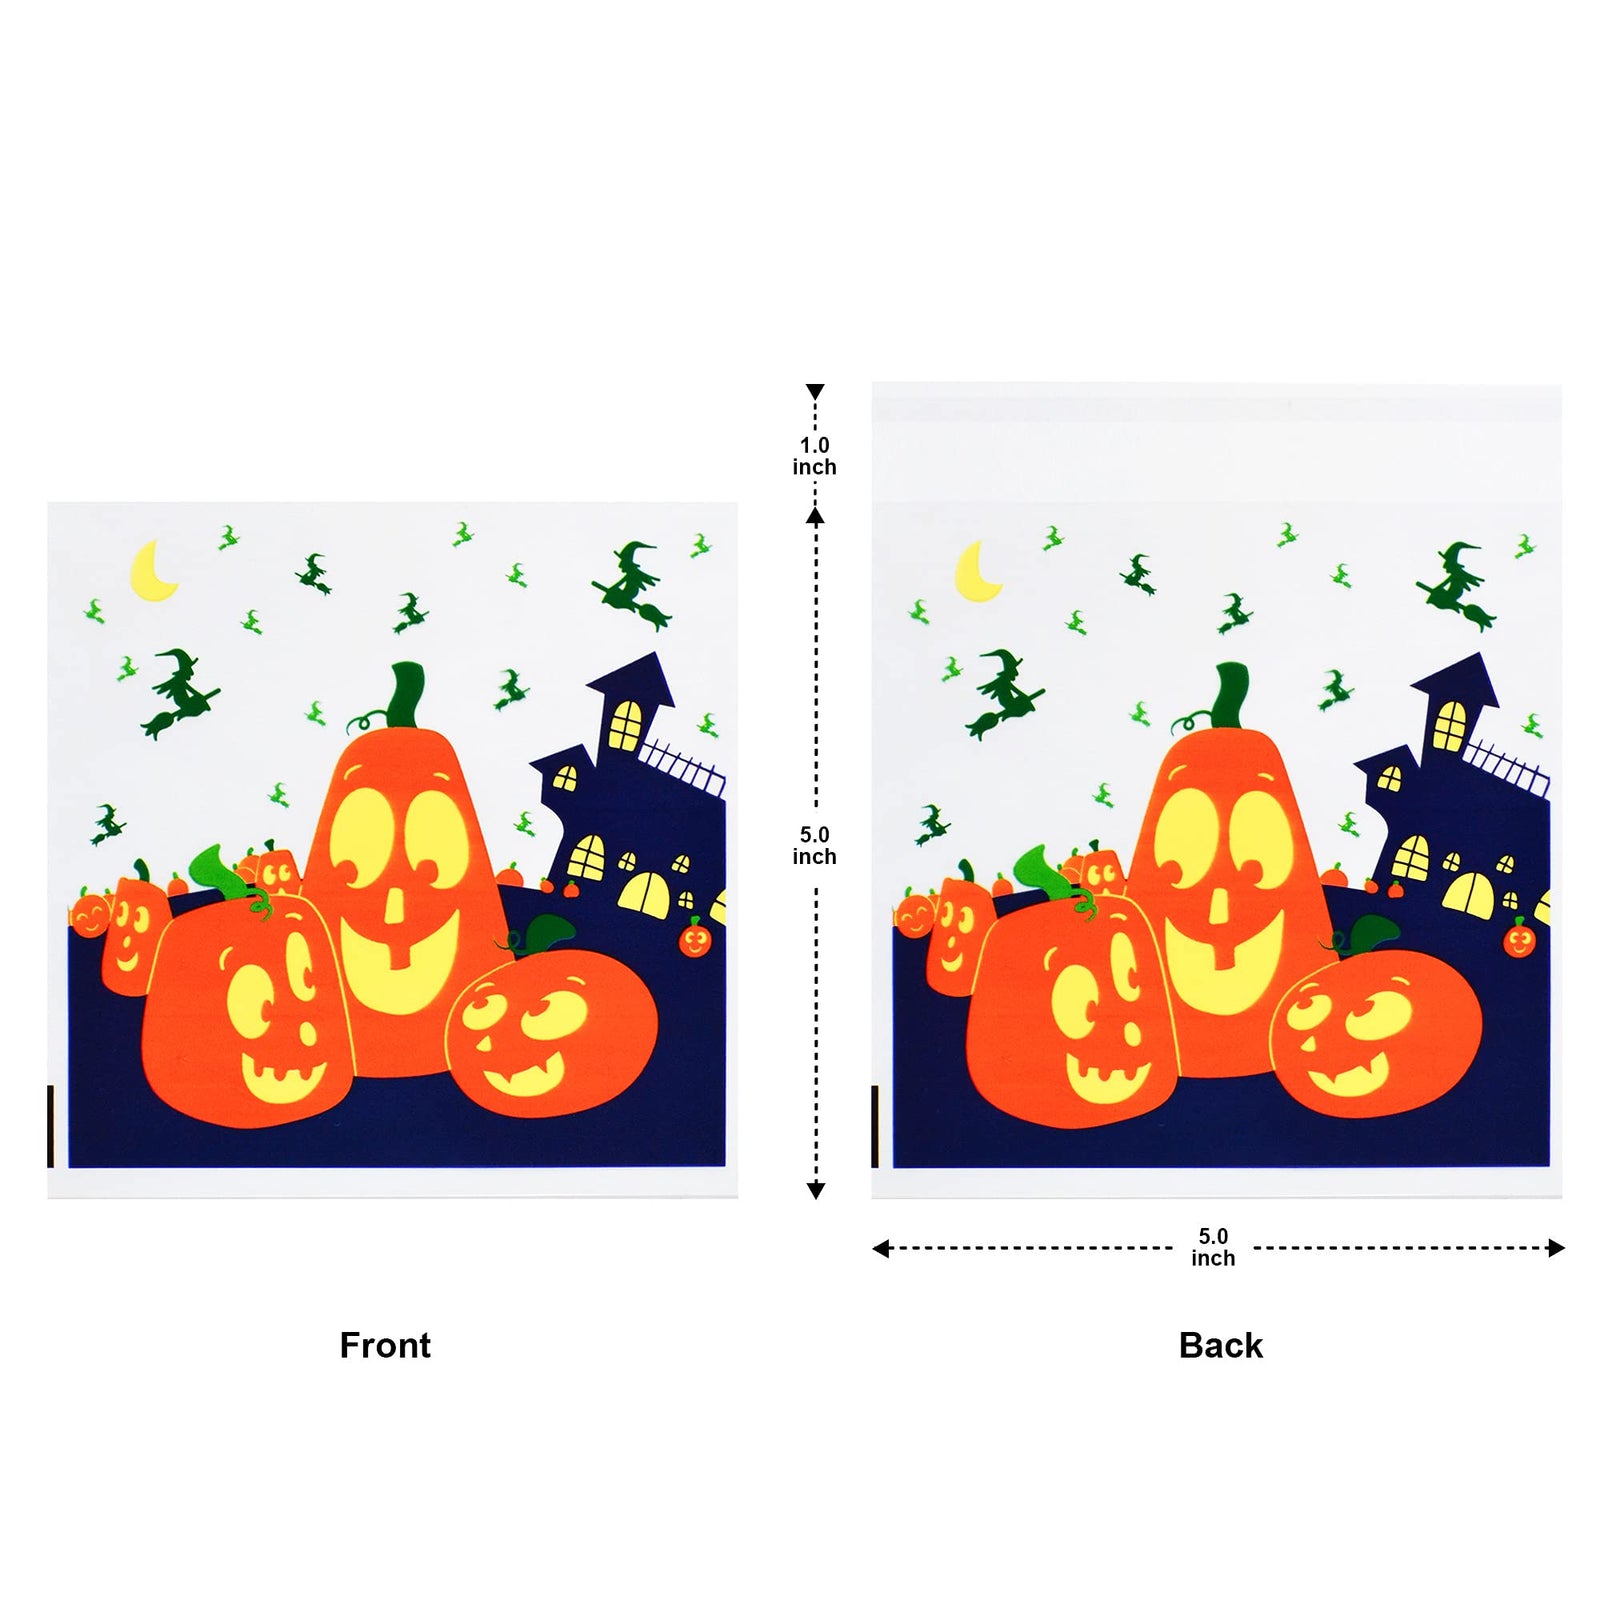 JOYIN 150 PCS Halloween Cellophane Treat Bags, Halloween Clear Self-adhesive Candy Bags, Halloween Plastic Cookie Bags for Trick or Treat, Halloween Goodie Bags for Party Favor Supplies